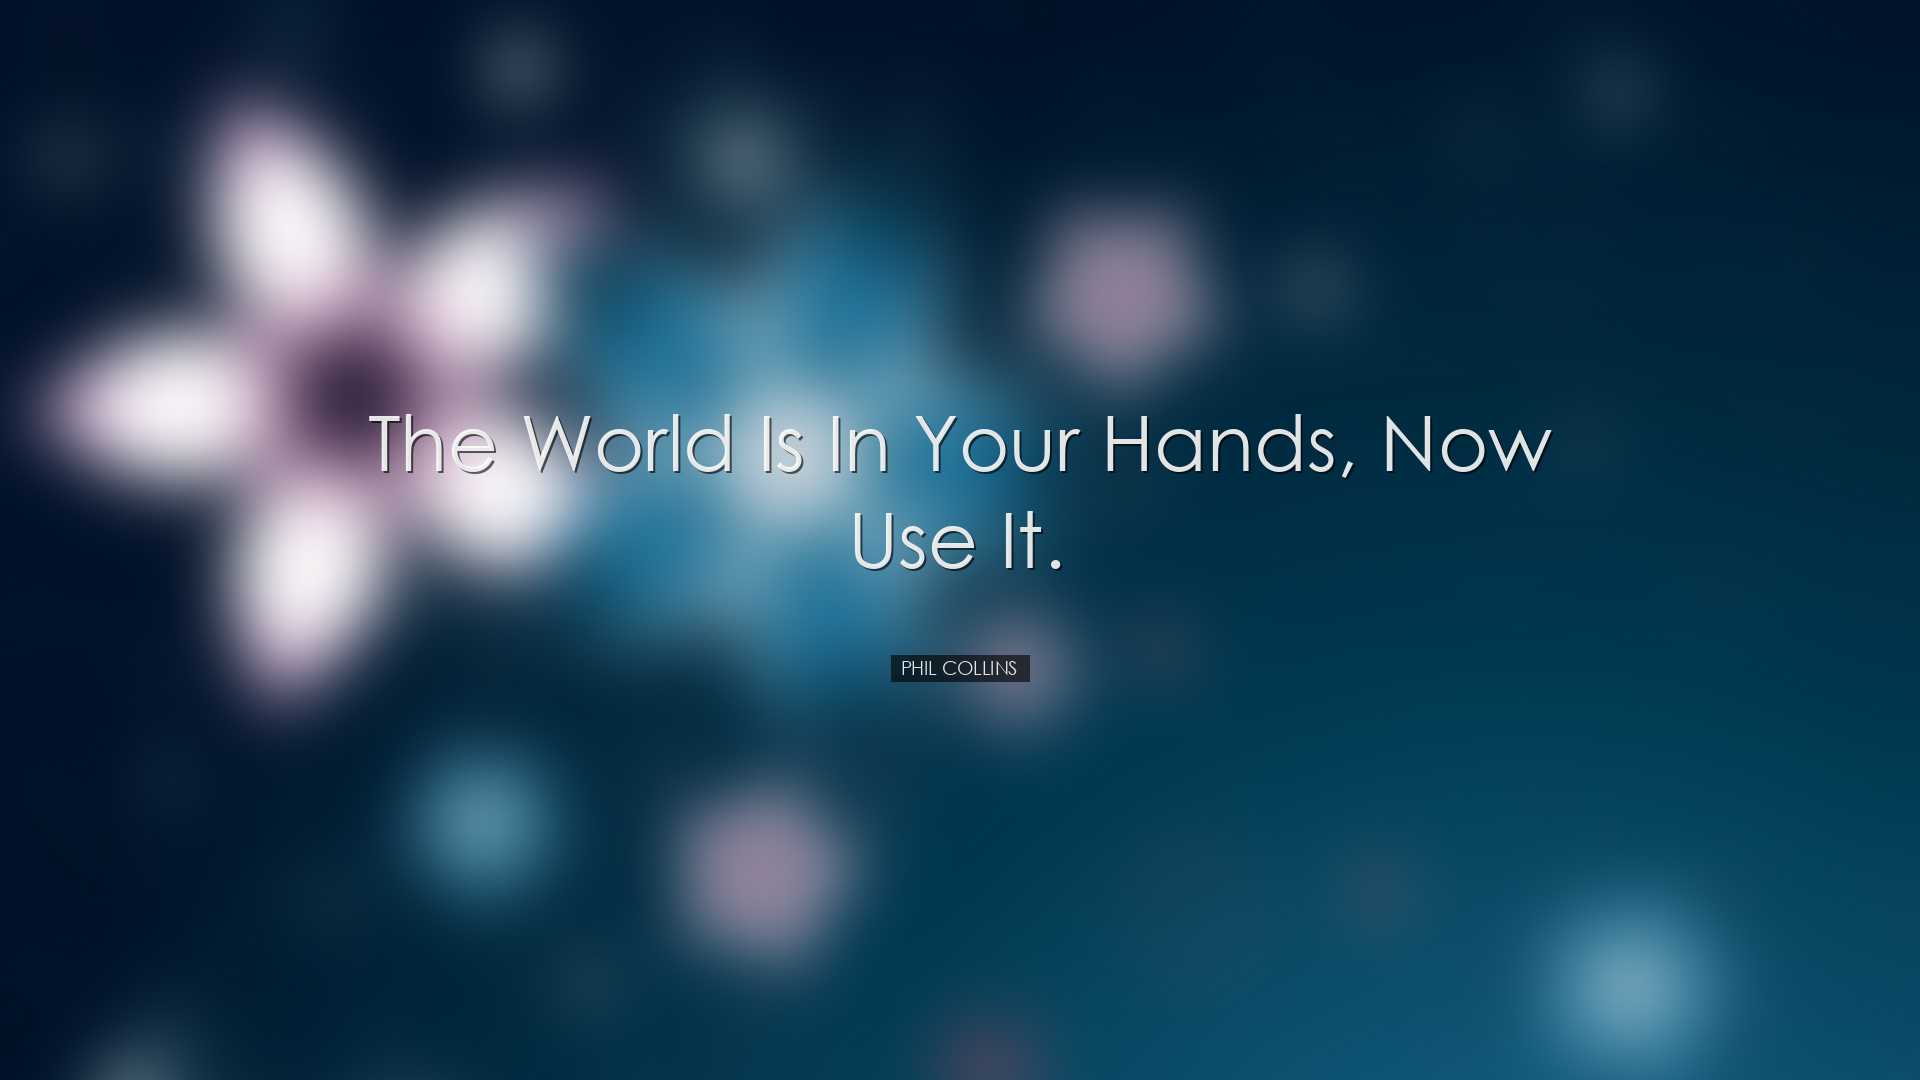 The world is in your hands, now use it. - Phil Collins